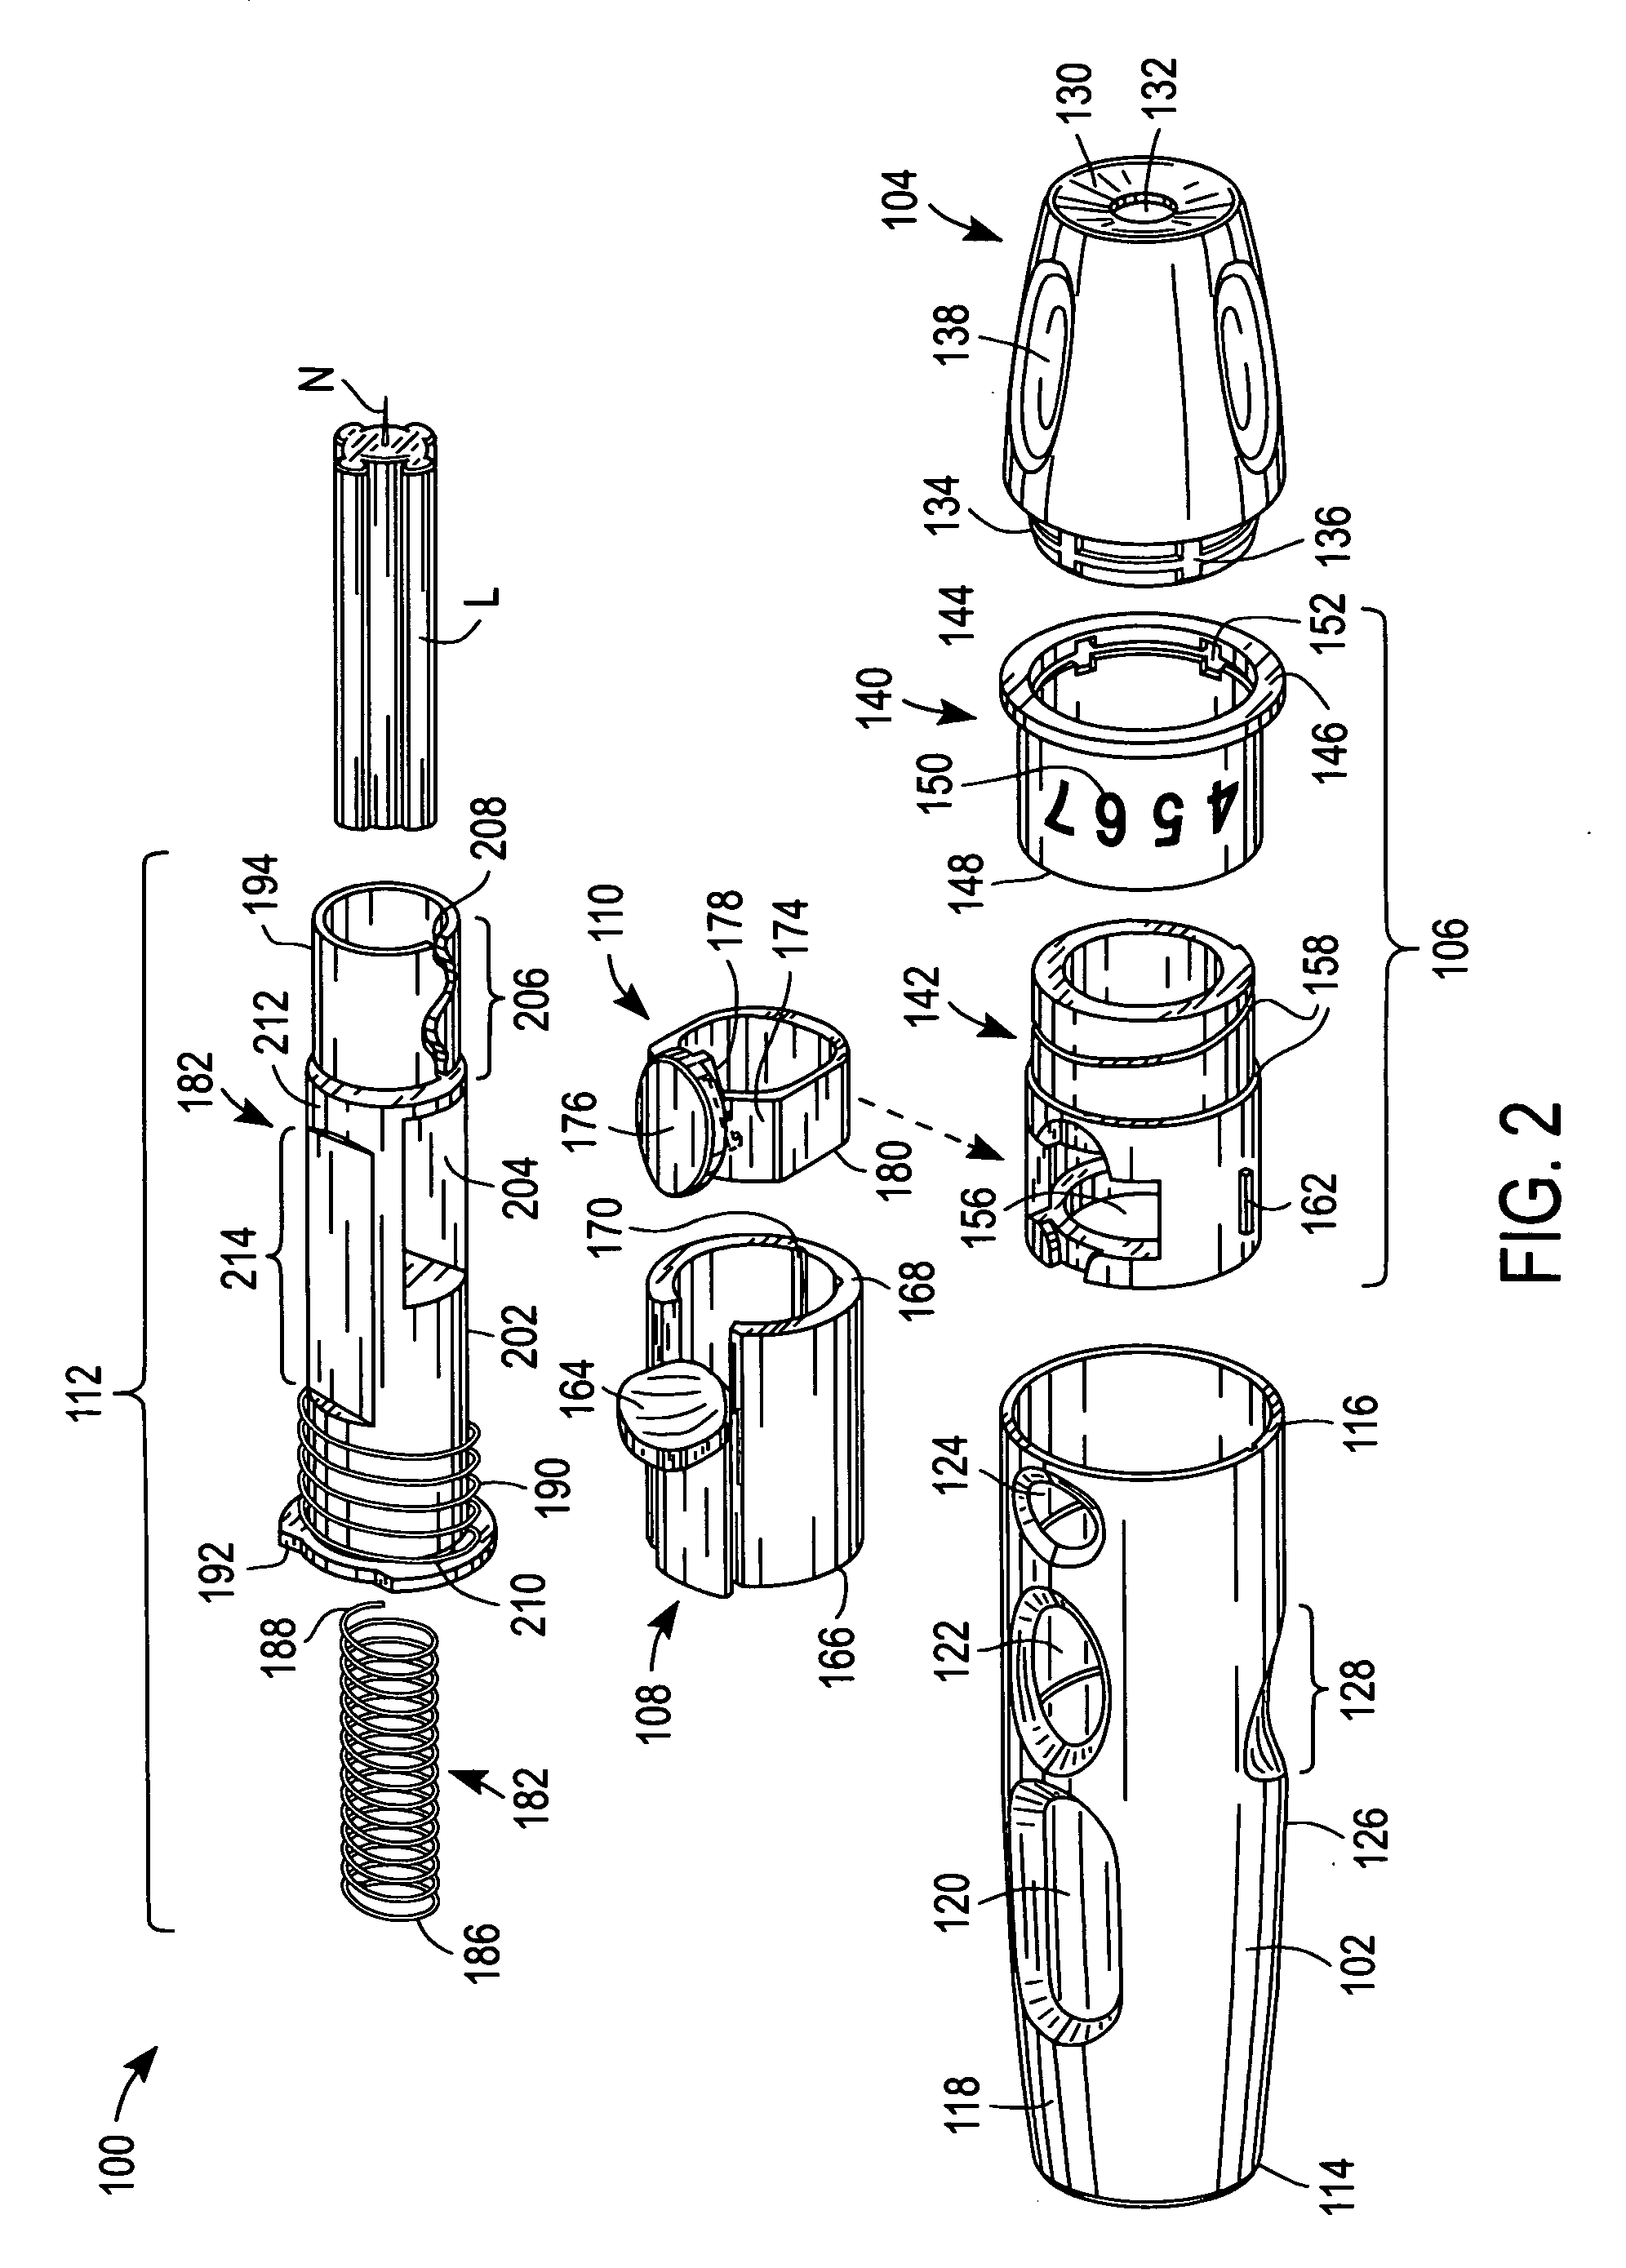 Combined lancing and auxiliary device